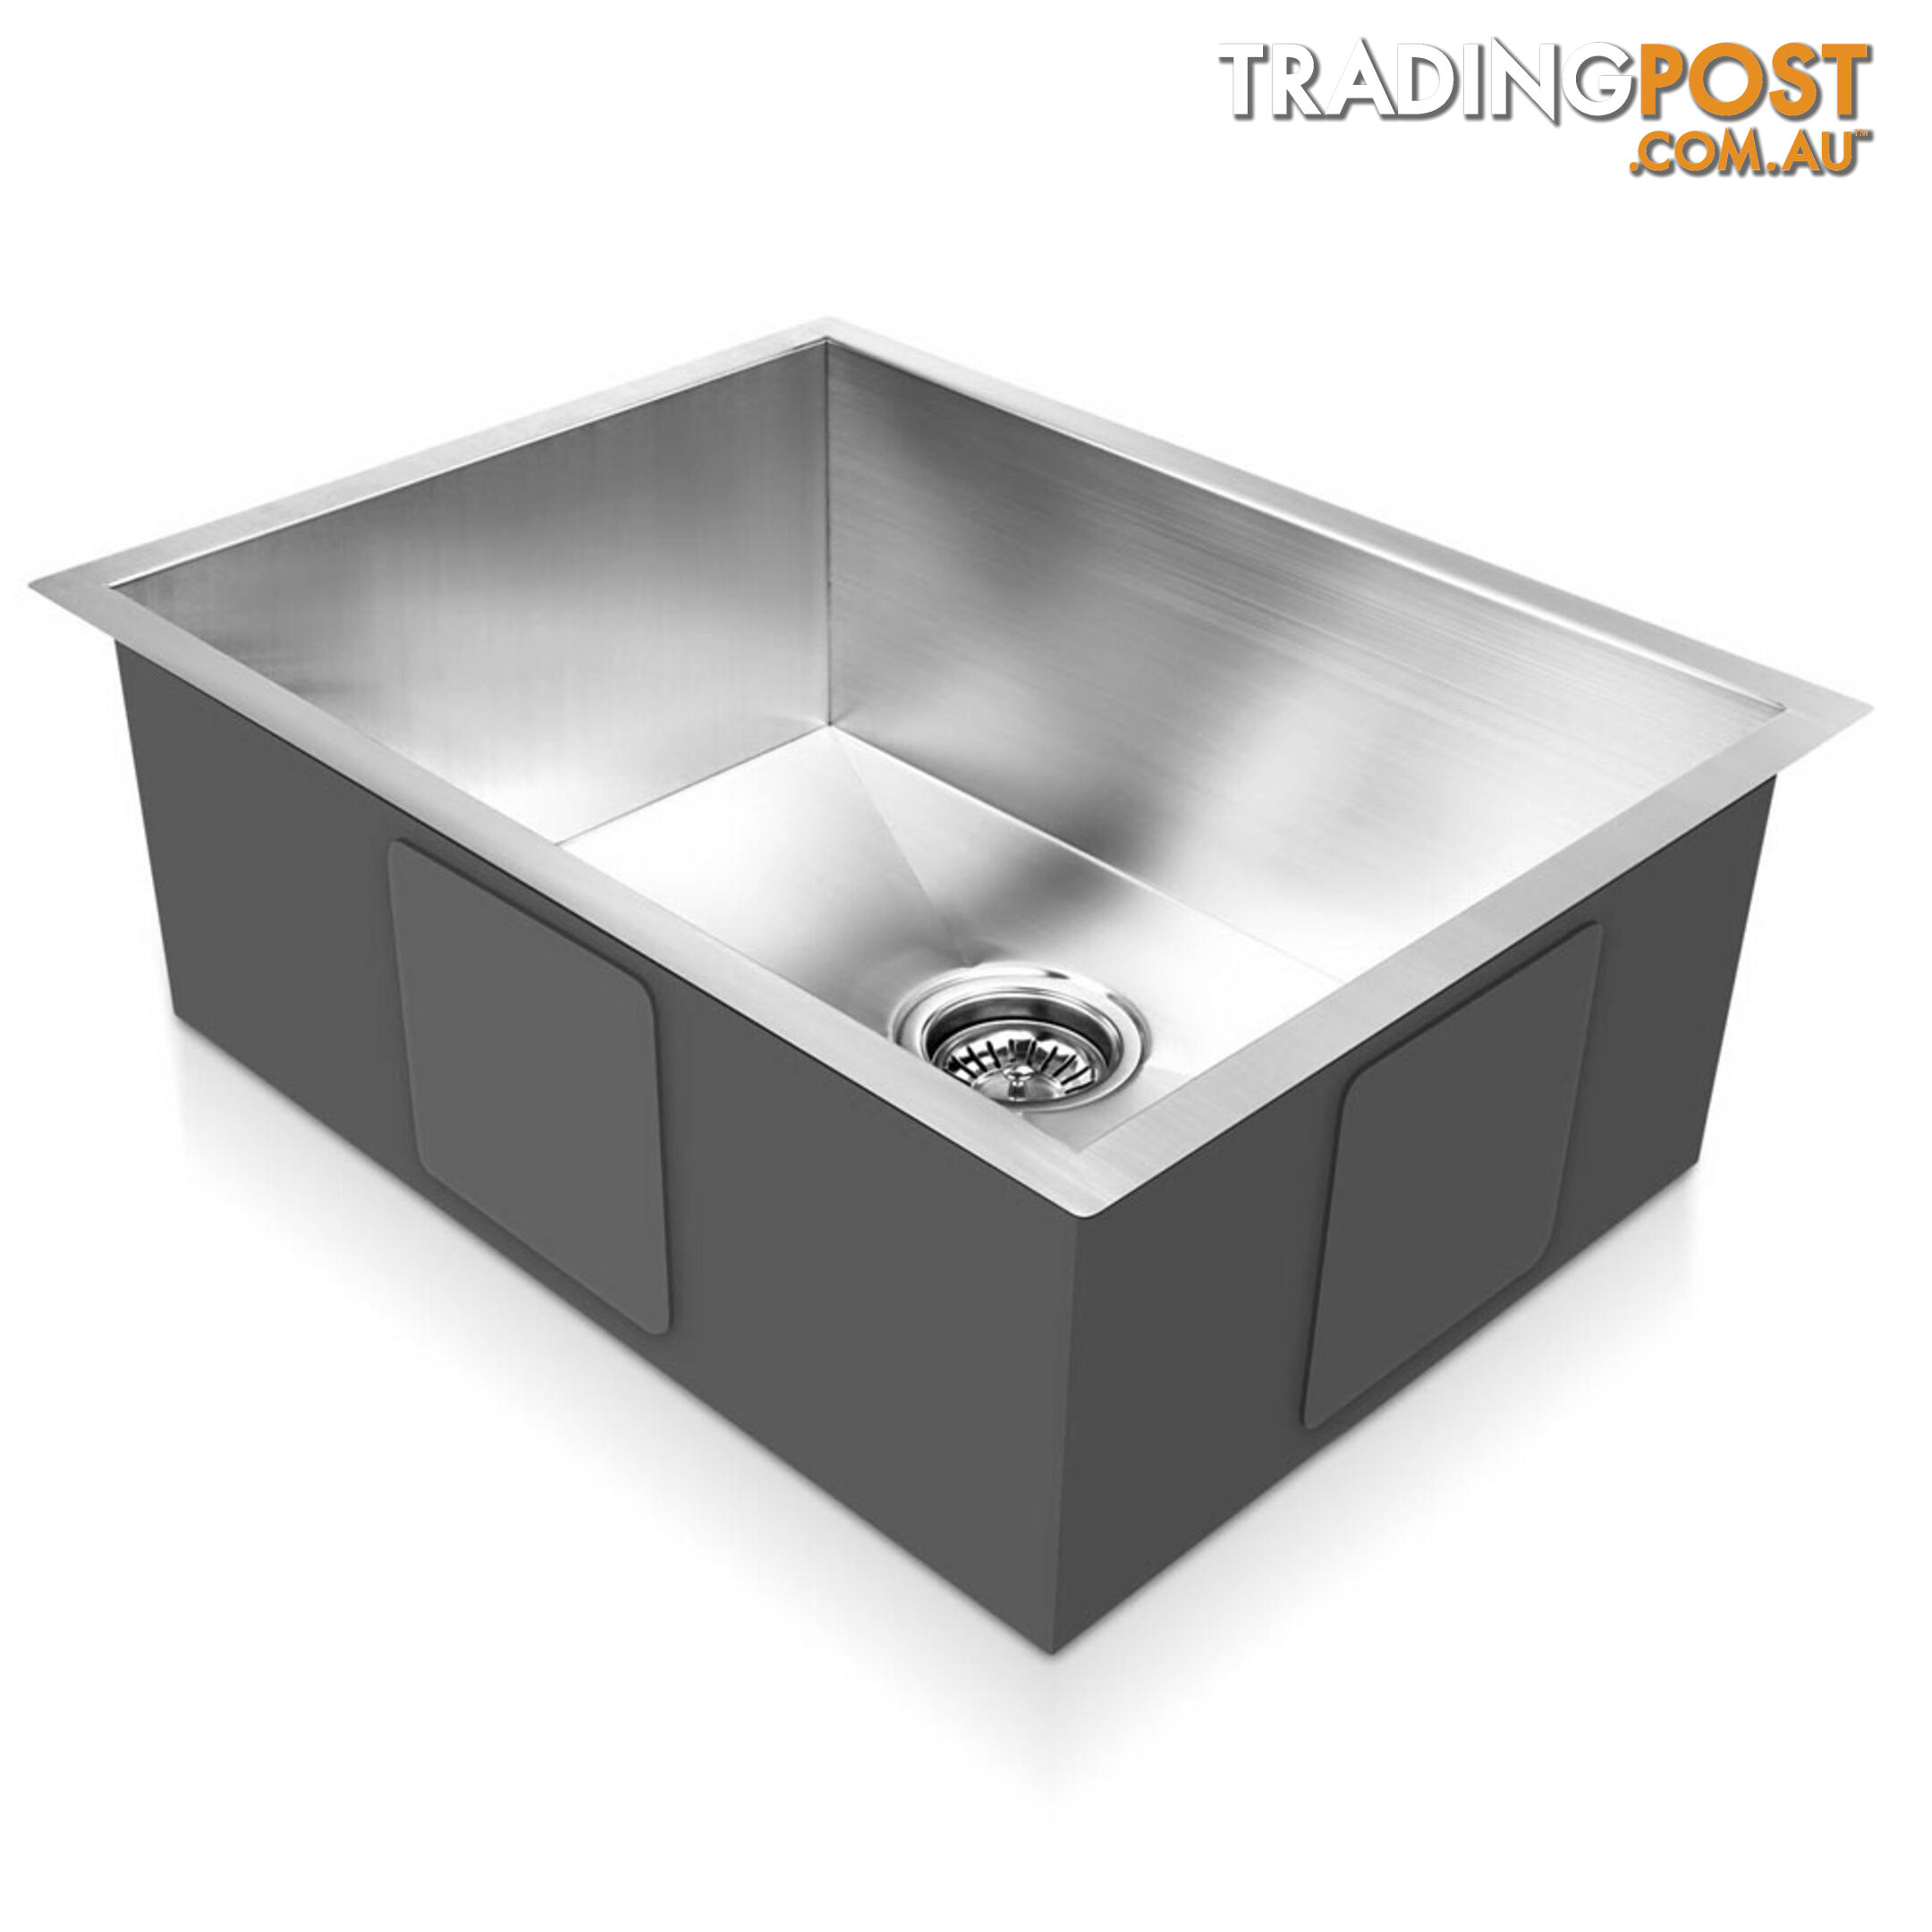 Stainless Steel Kitchen/Laundry Sink with Waste Strainer 600 x 450 mm